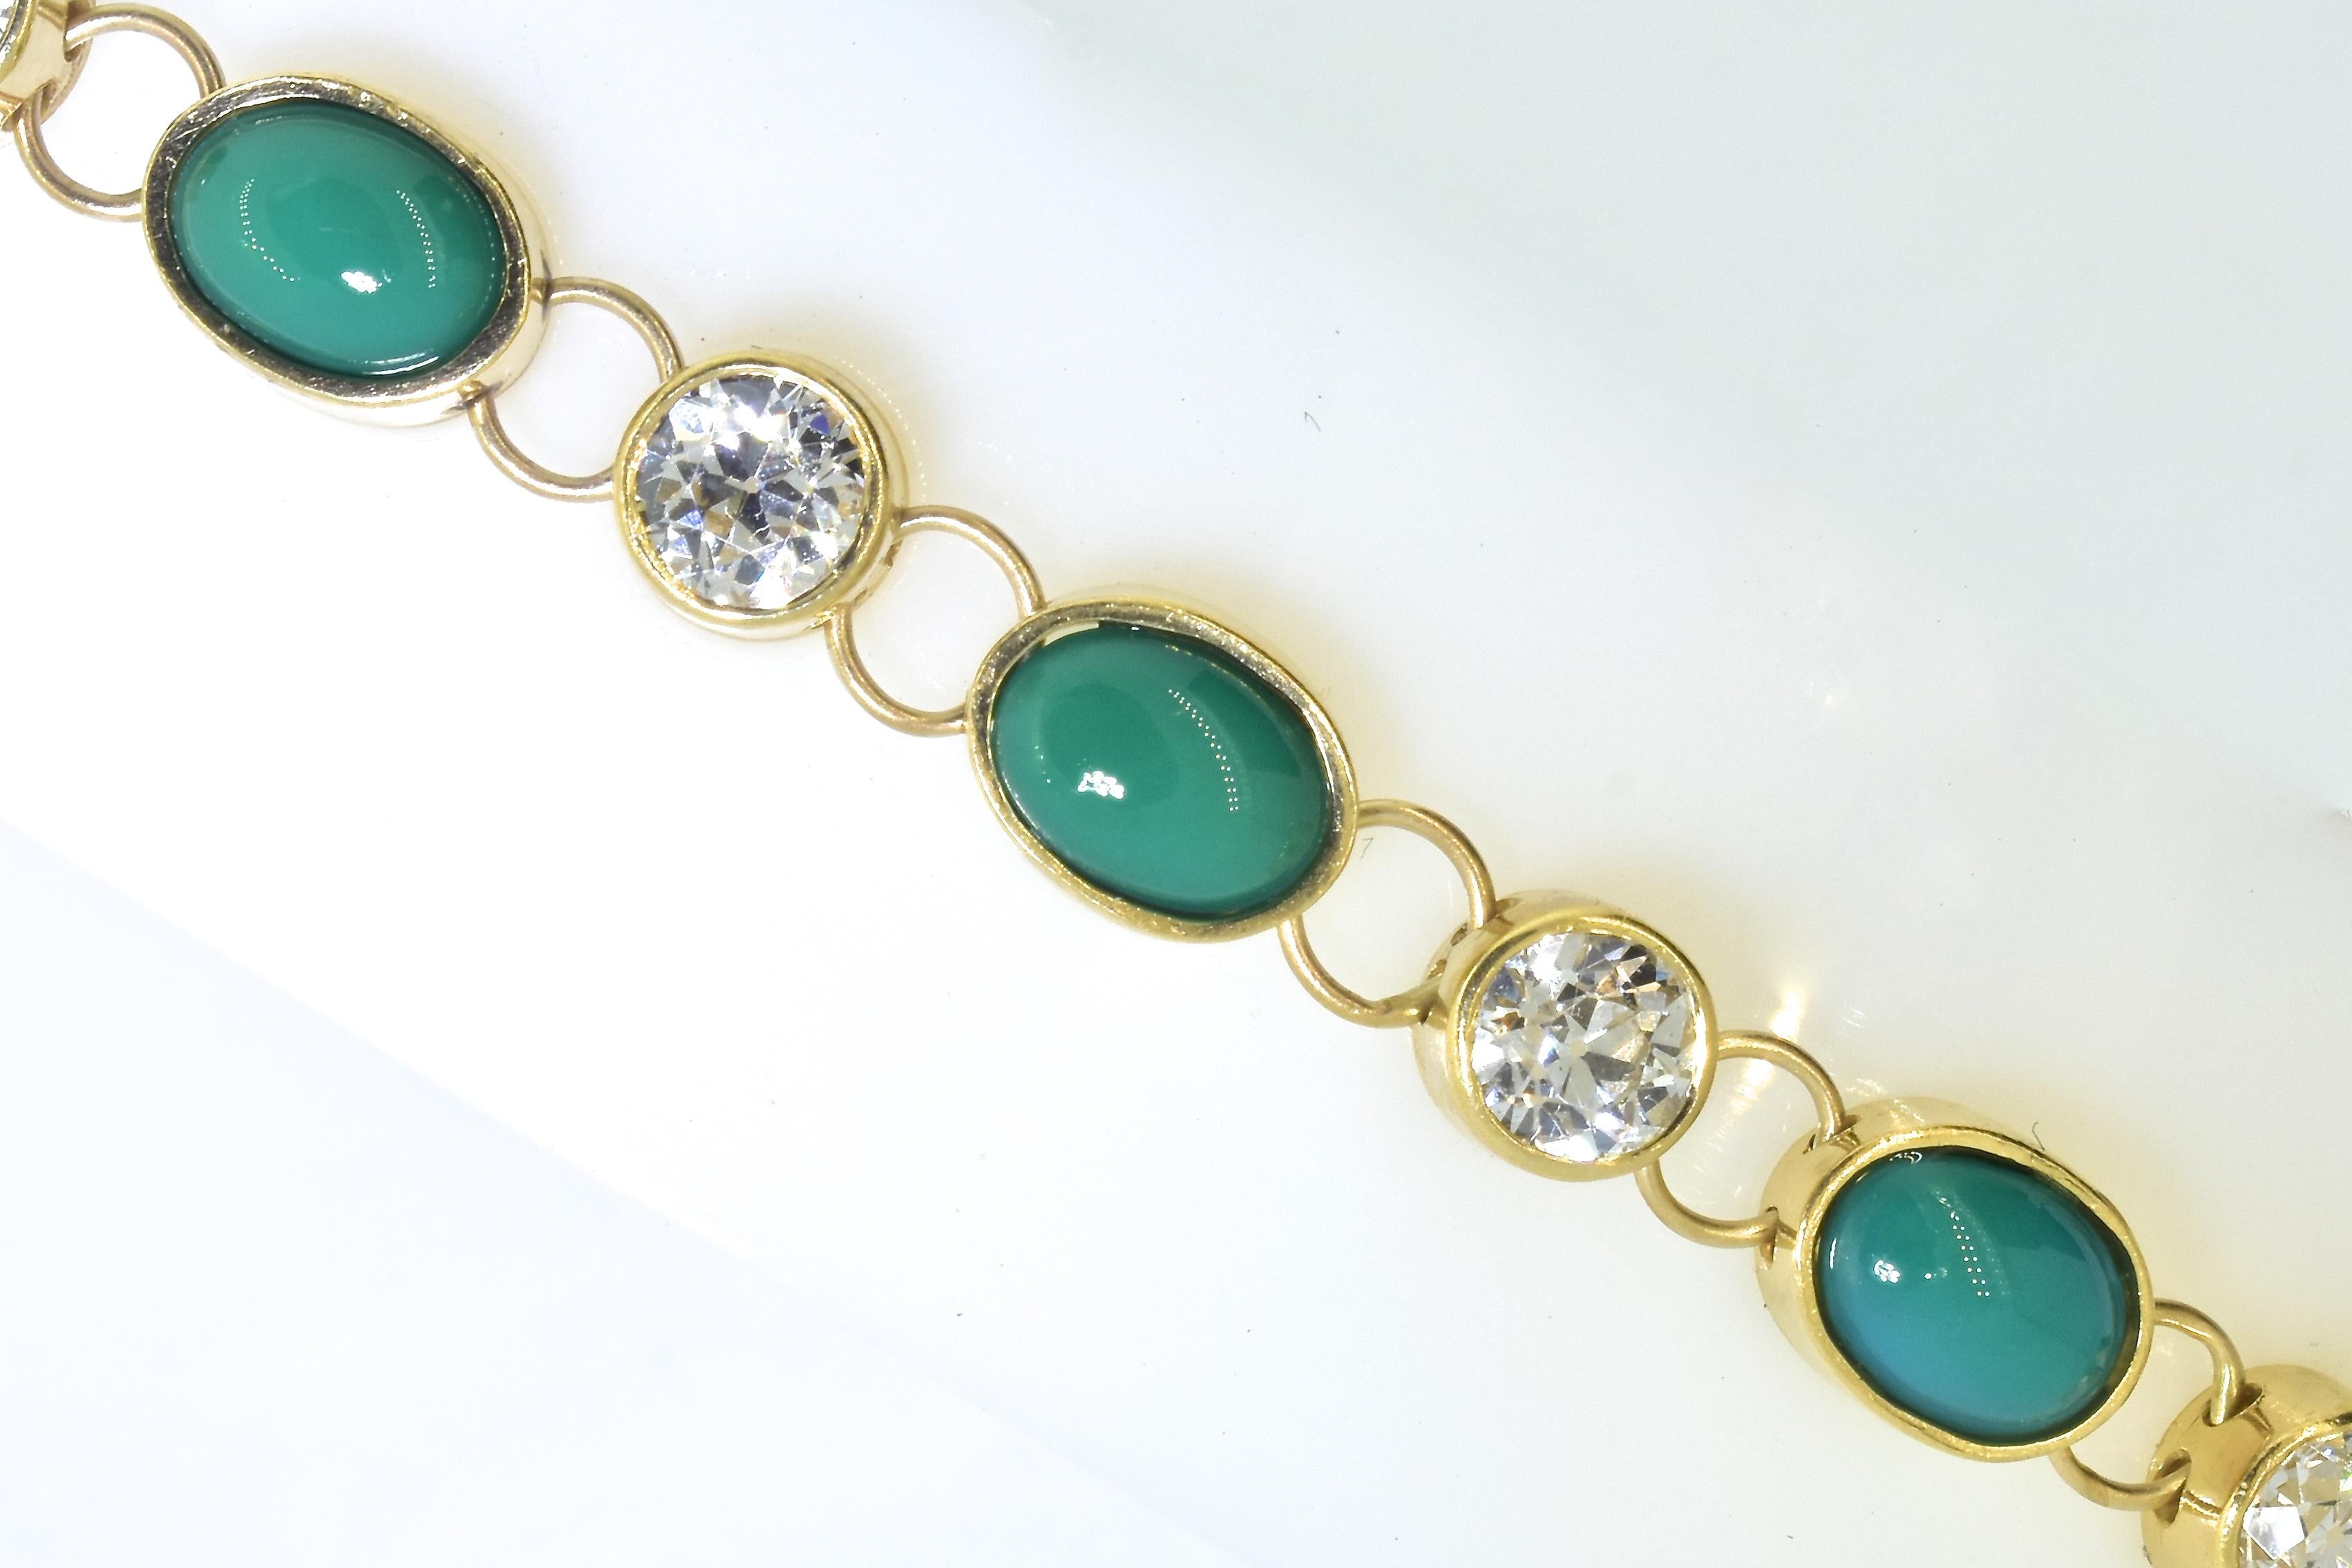 Tiffany & Company 18K yellow gold bracelet set with fine old European cut diamonds and natural turquoise.  The 6 diamonds are all well matched in cut and symmetry.  They are near colorless, (H,I) and very slightly included (VS).  There is an